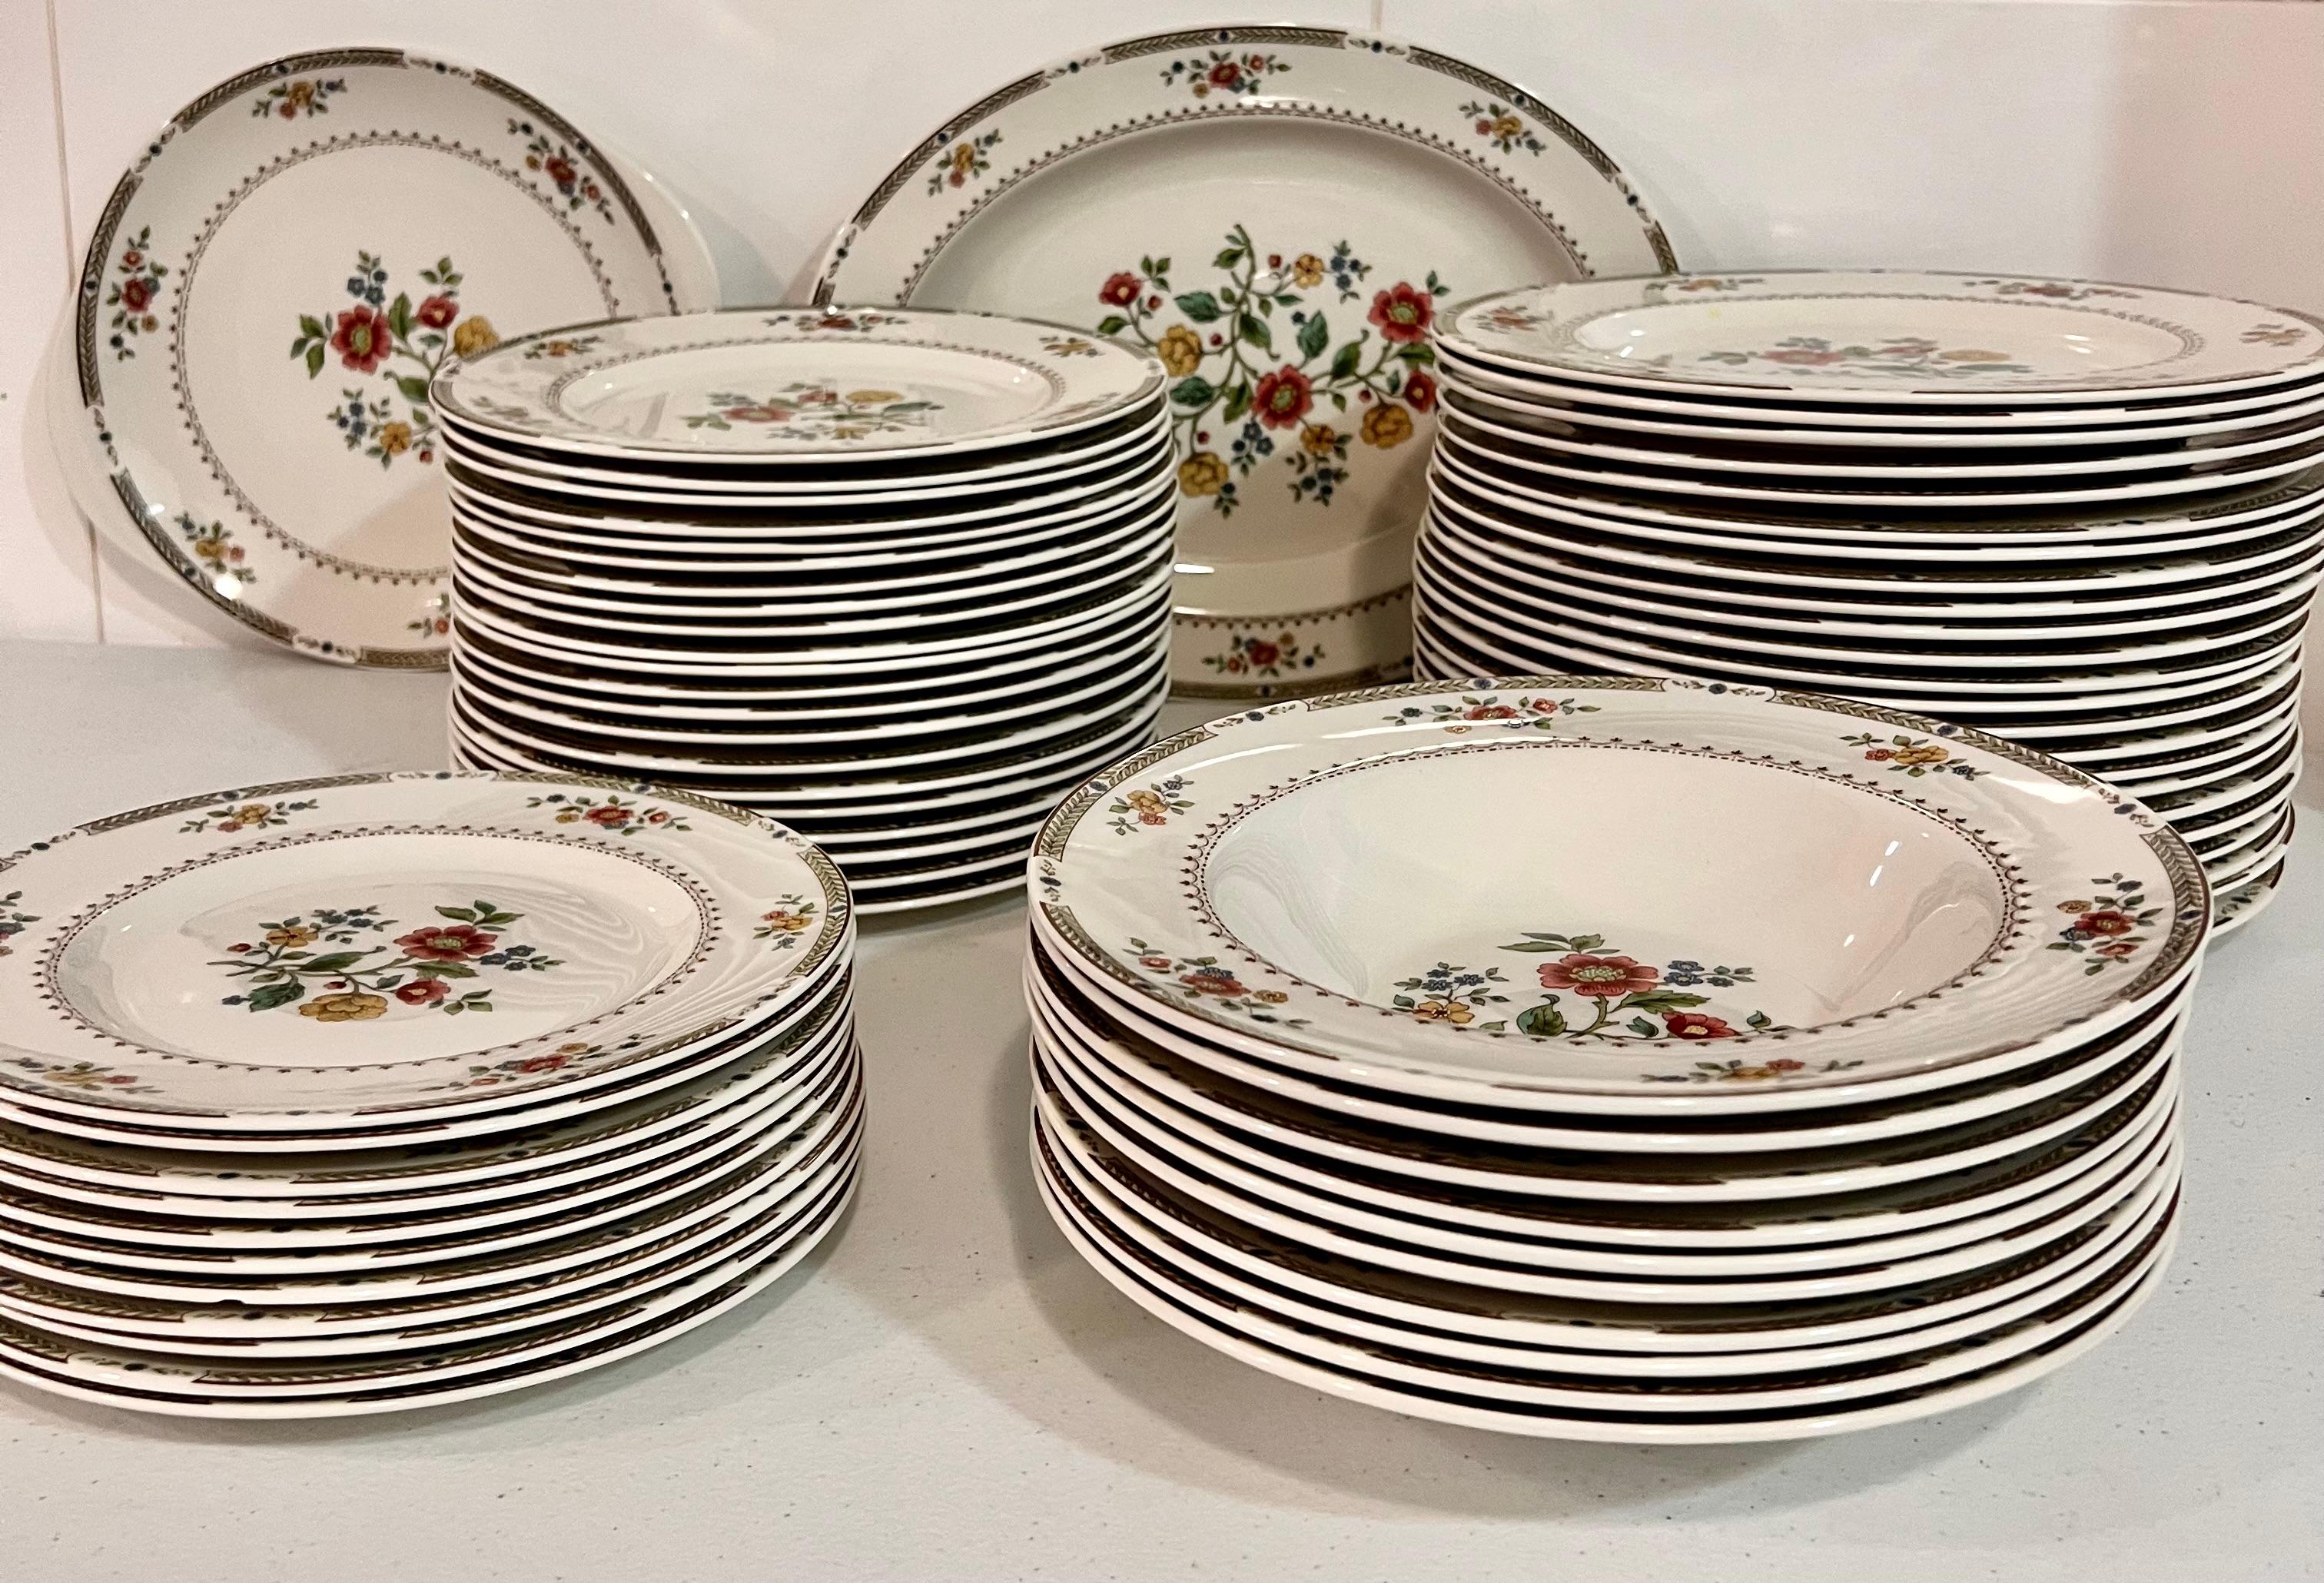 Bread & Butter plate Replacement Flatware & dinnerware Kingswood by Royal Doulton

Measure: Width: 6 1/2 in
Crafted in England
Hand Wash

Request info for flatware and diner ware 
We sell them individually or in sets
We have a full